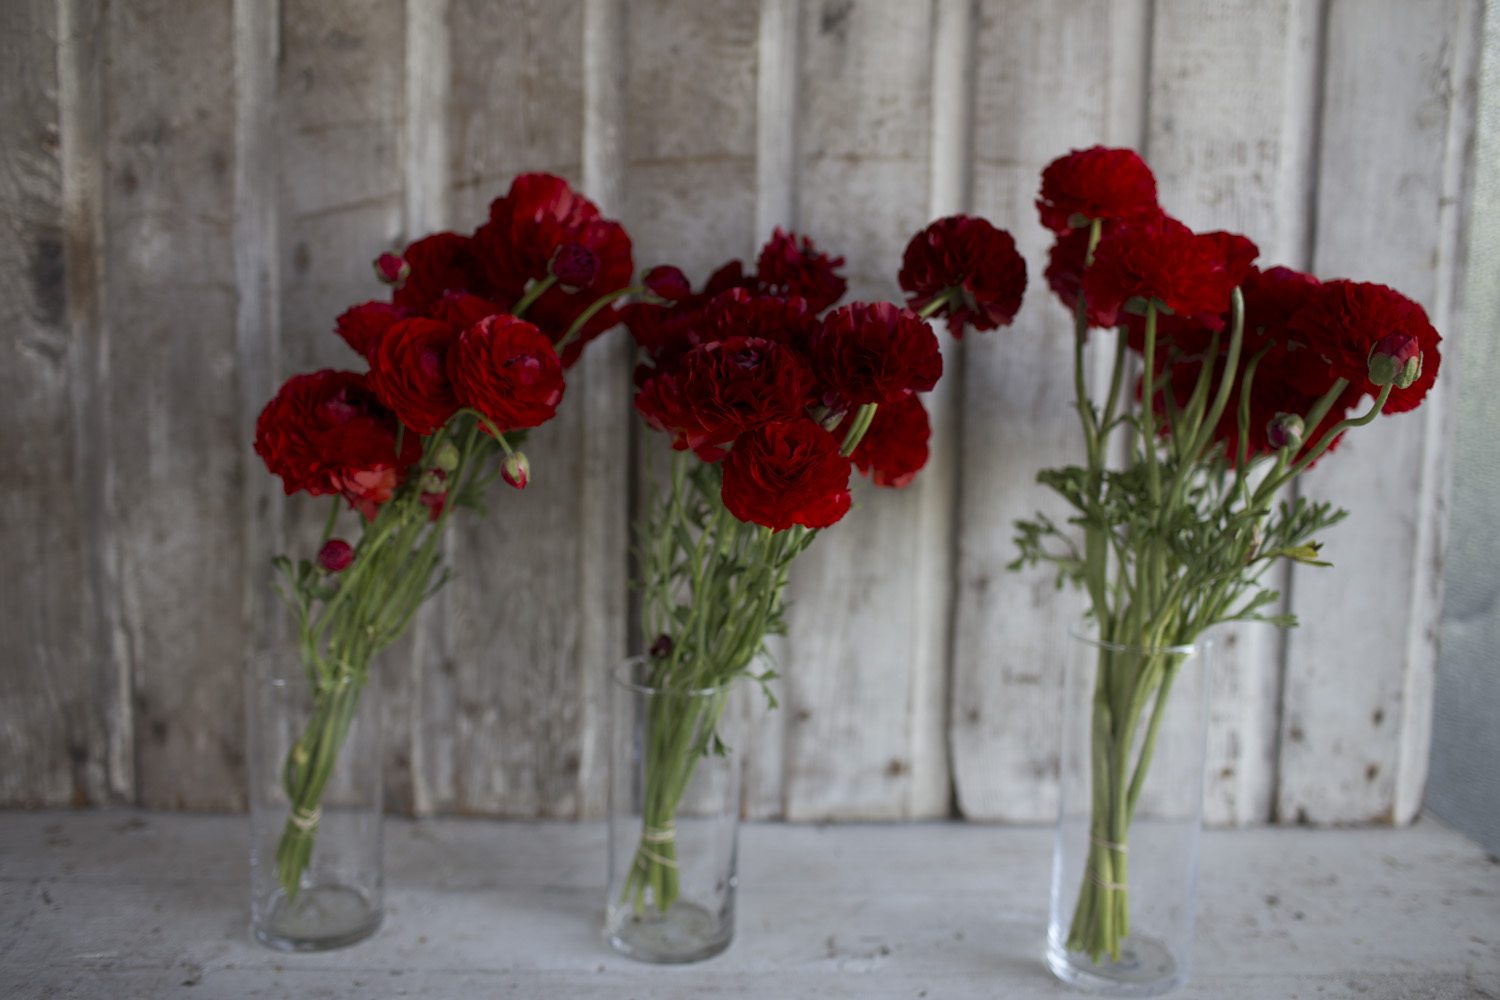 Vases of red flowers